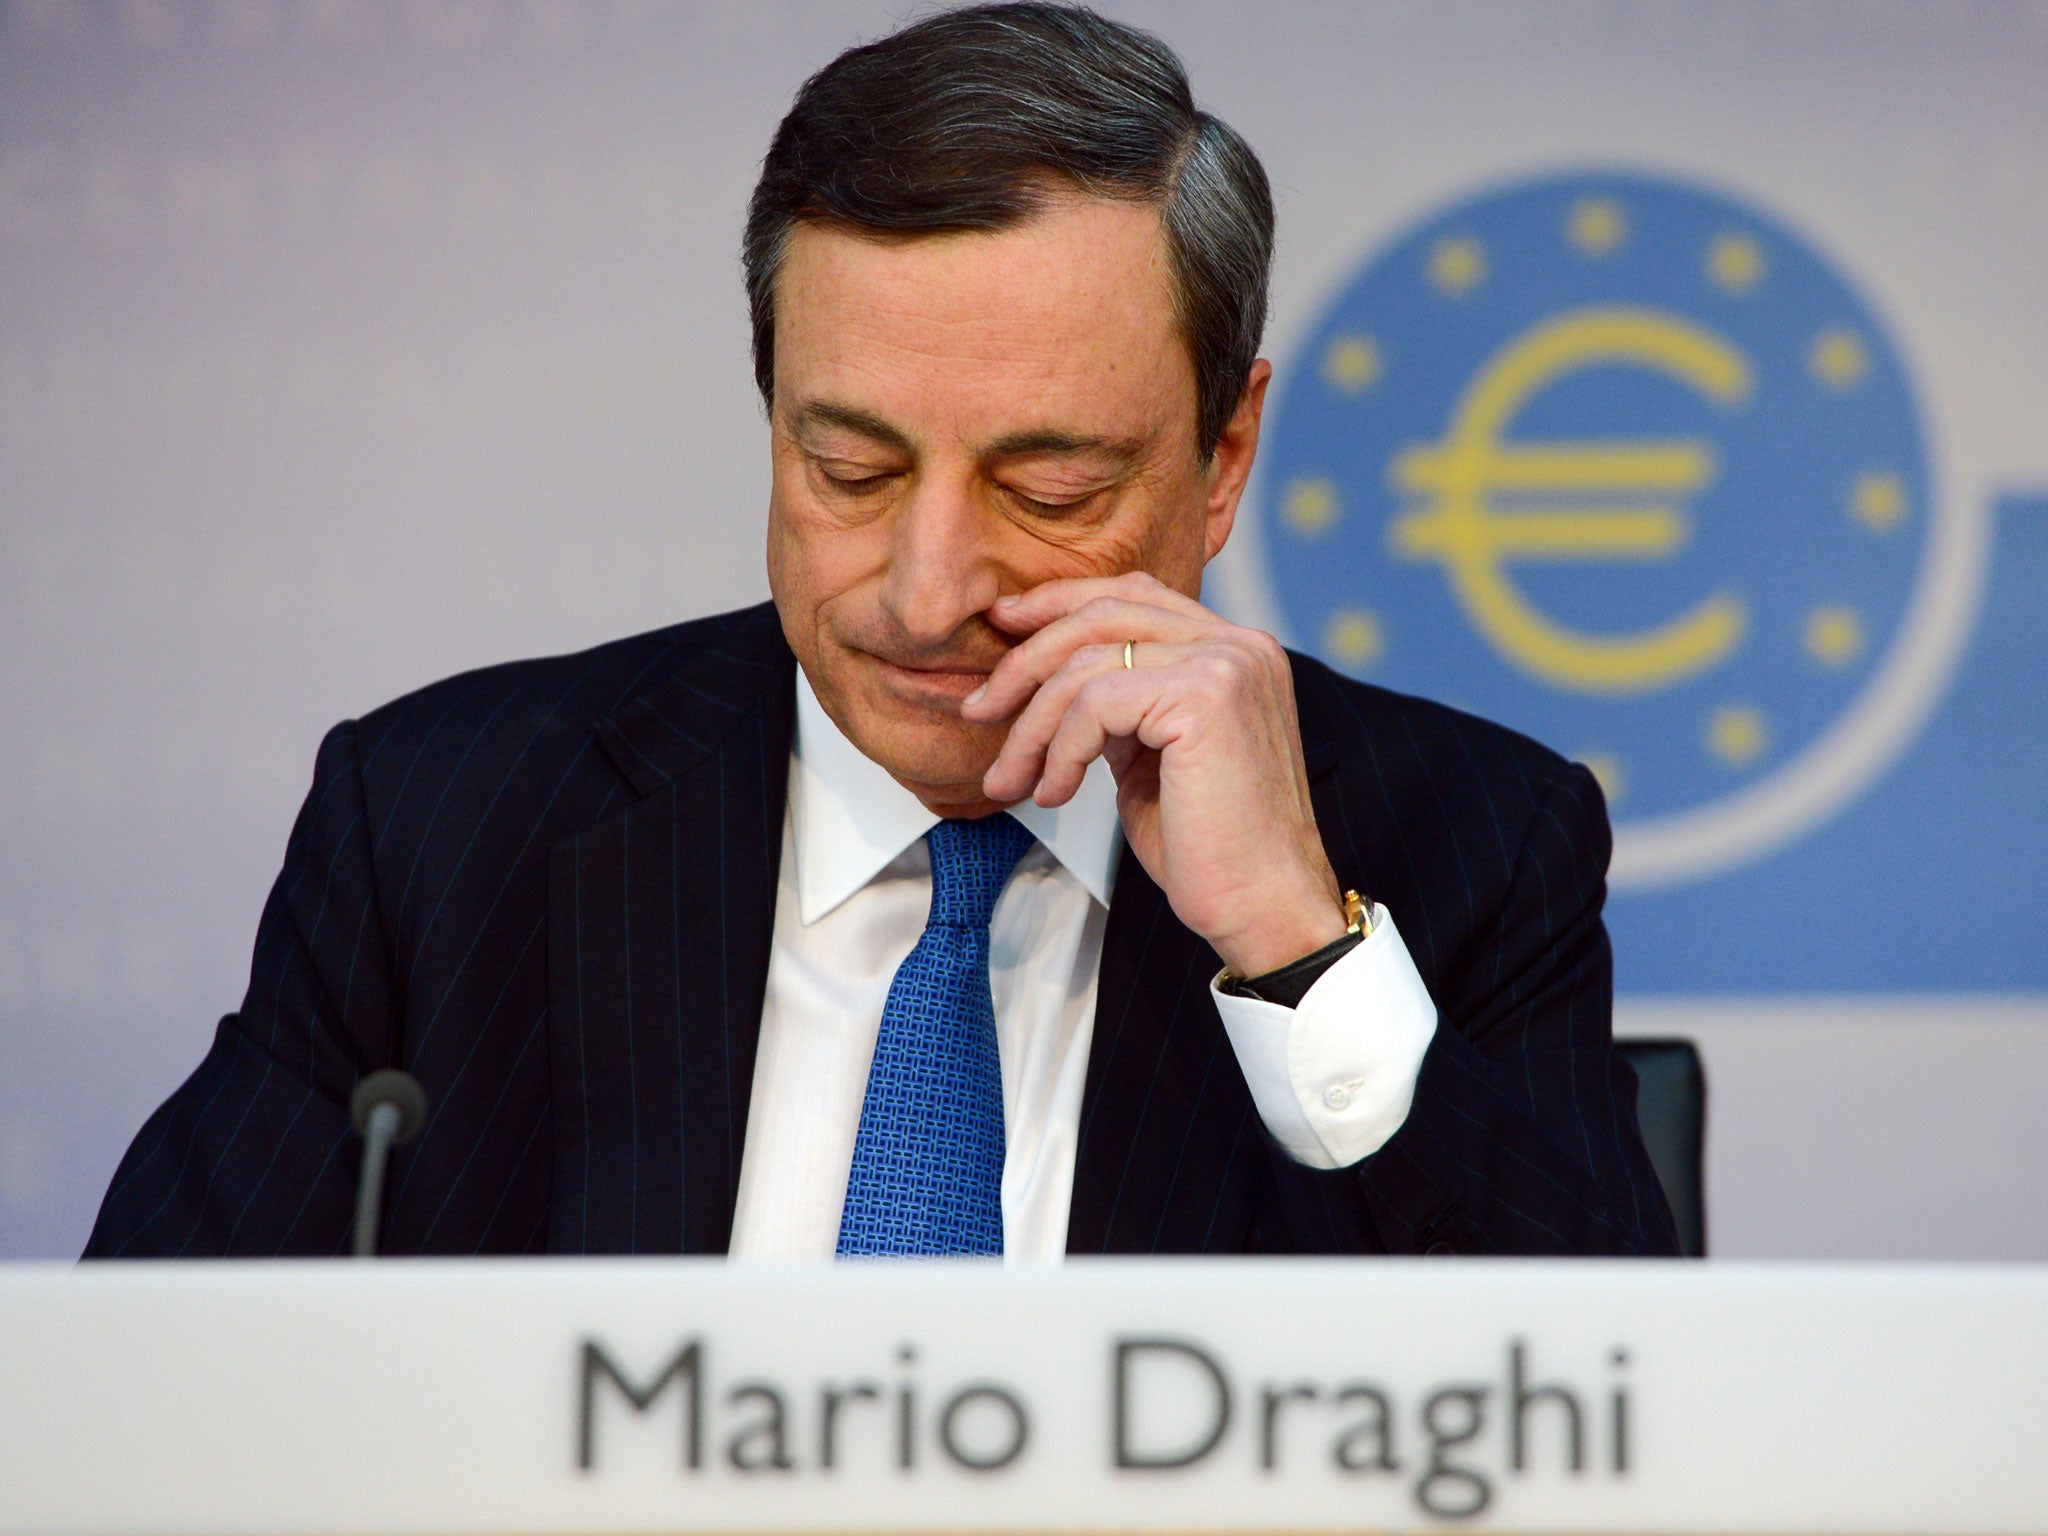 President of the European Central Bank (ECB) Mario Draghi attends a press conference in Frankfurt am Main, on June 5, 2014.